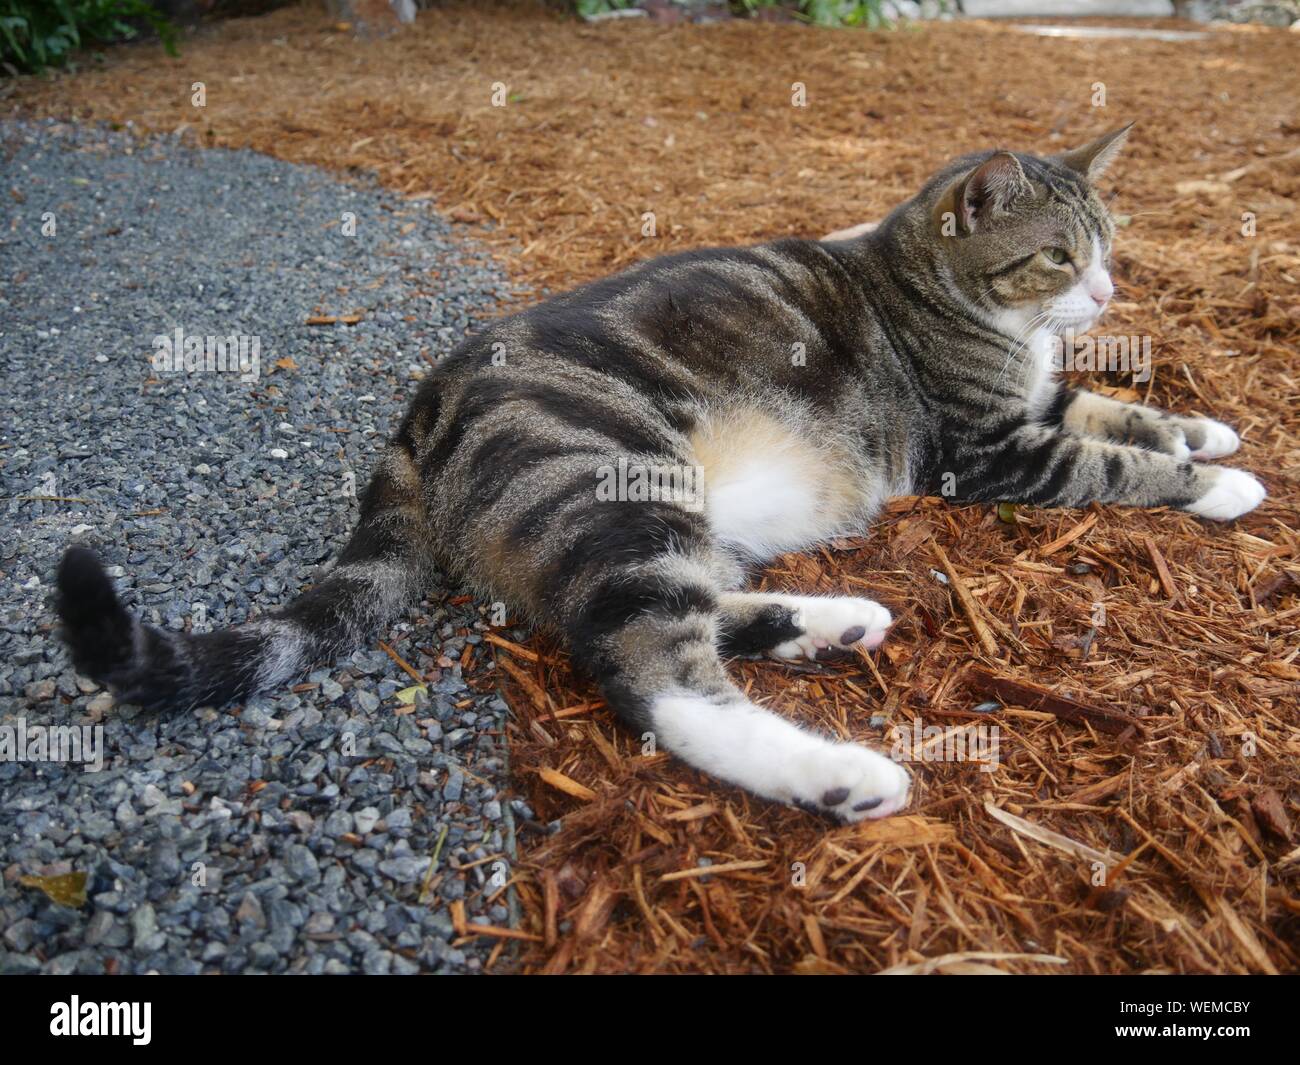 One of the famous cats at the Hemingway house gardens in Key West, Florida. Stock Photo